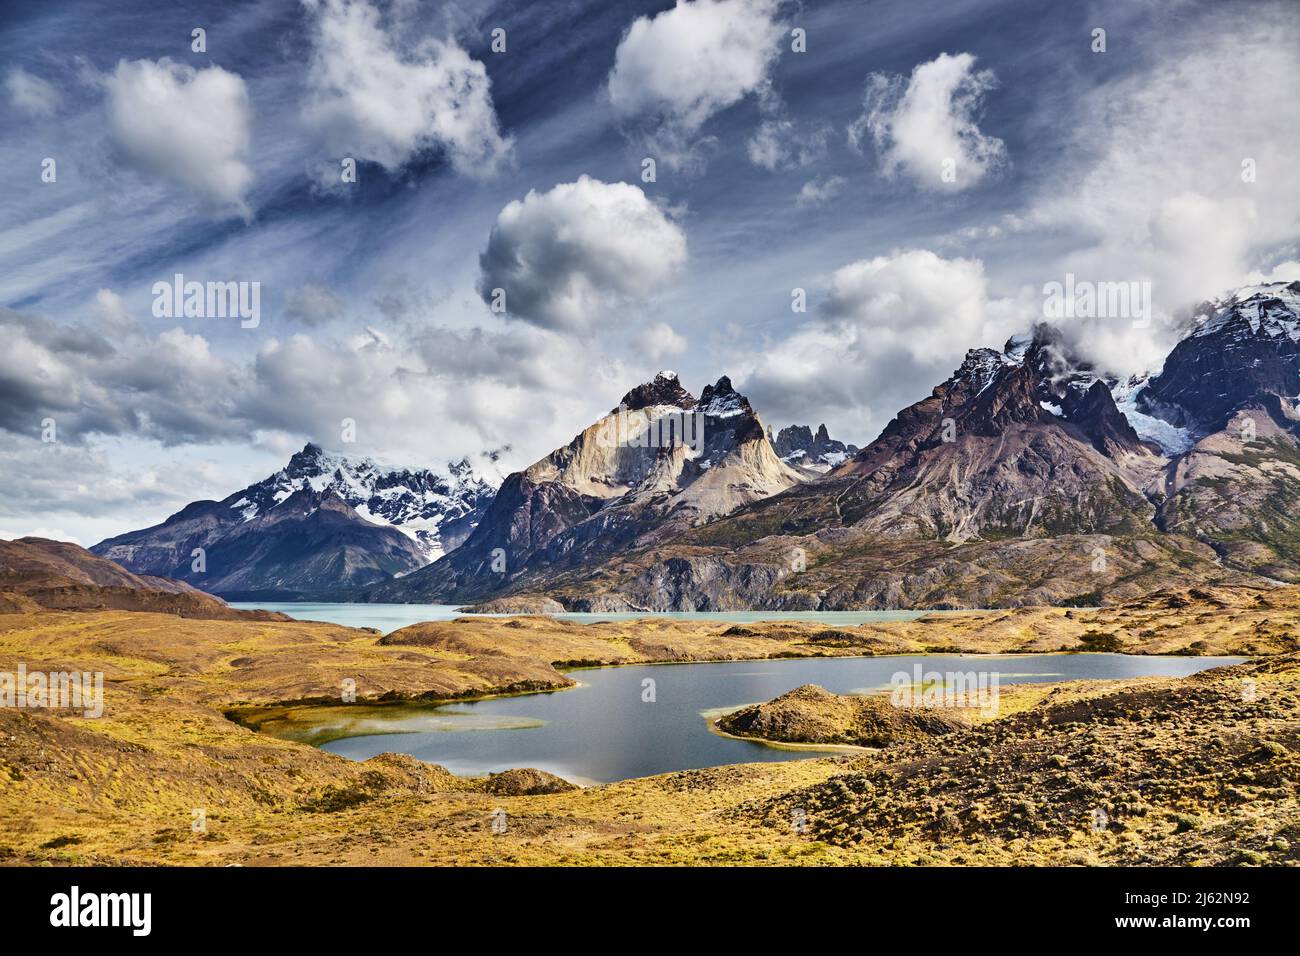 Mountain landscape, Torres del Paine National Park, Patagonia, Chile Stock Photo